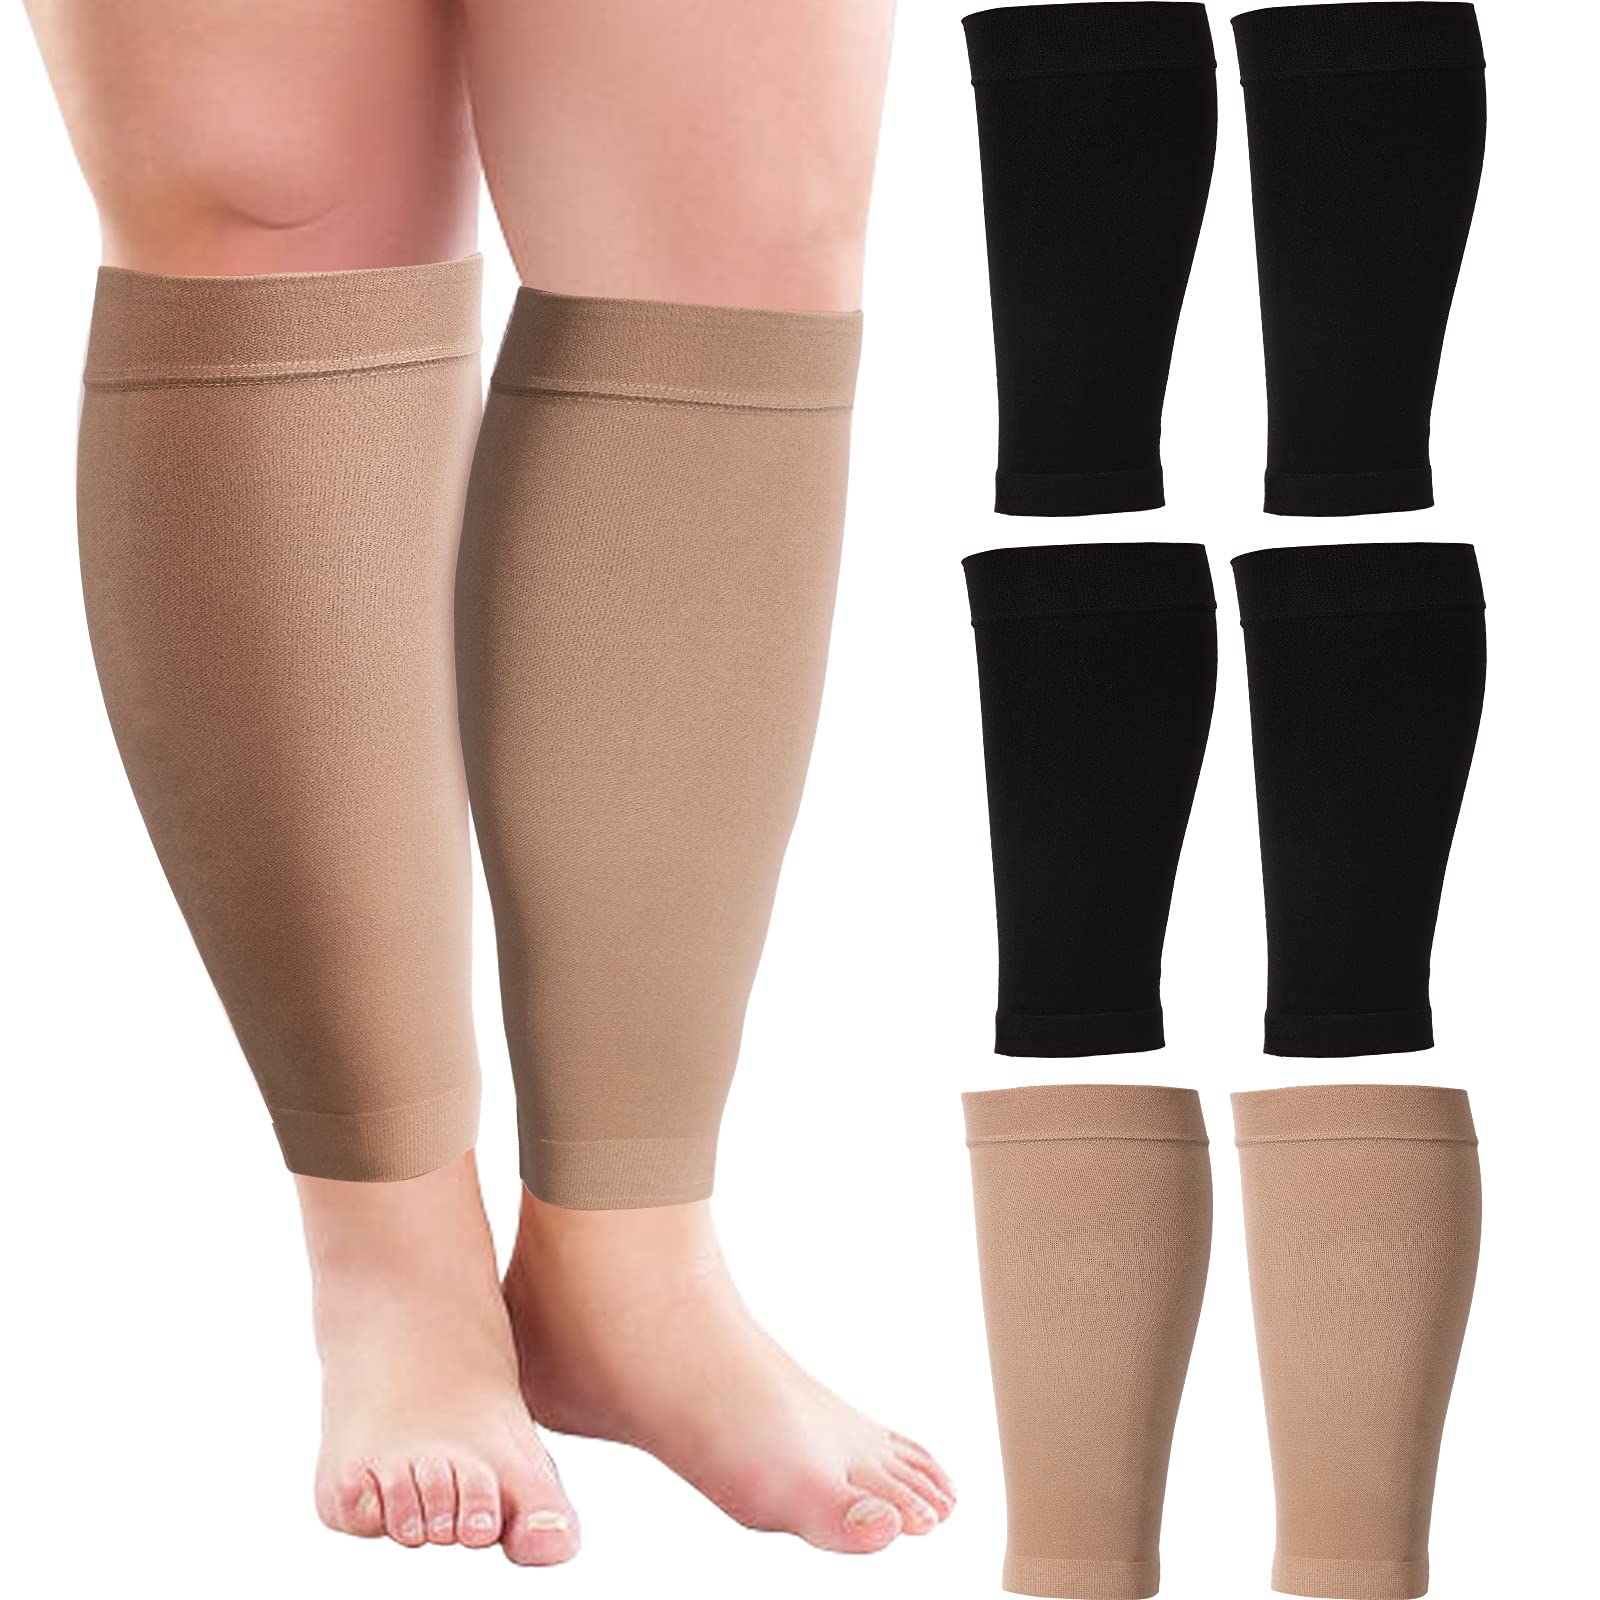 3 Pack) 7XL Big and Tall Compression Socks 20-30 mmHg Extra Large Wide Calf  - Plus Size Compression Support Hose Men & Women Bariatric Fatigue Pain Leg  Swelling by Absolute Support 